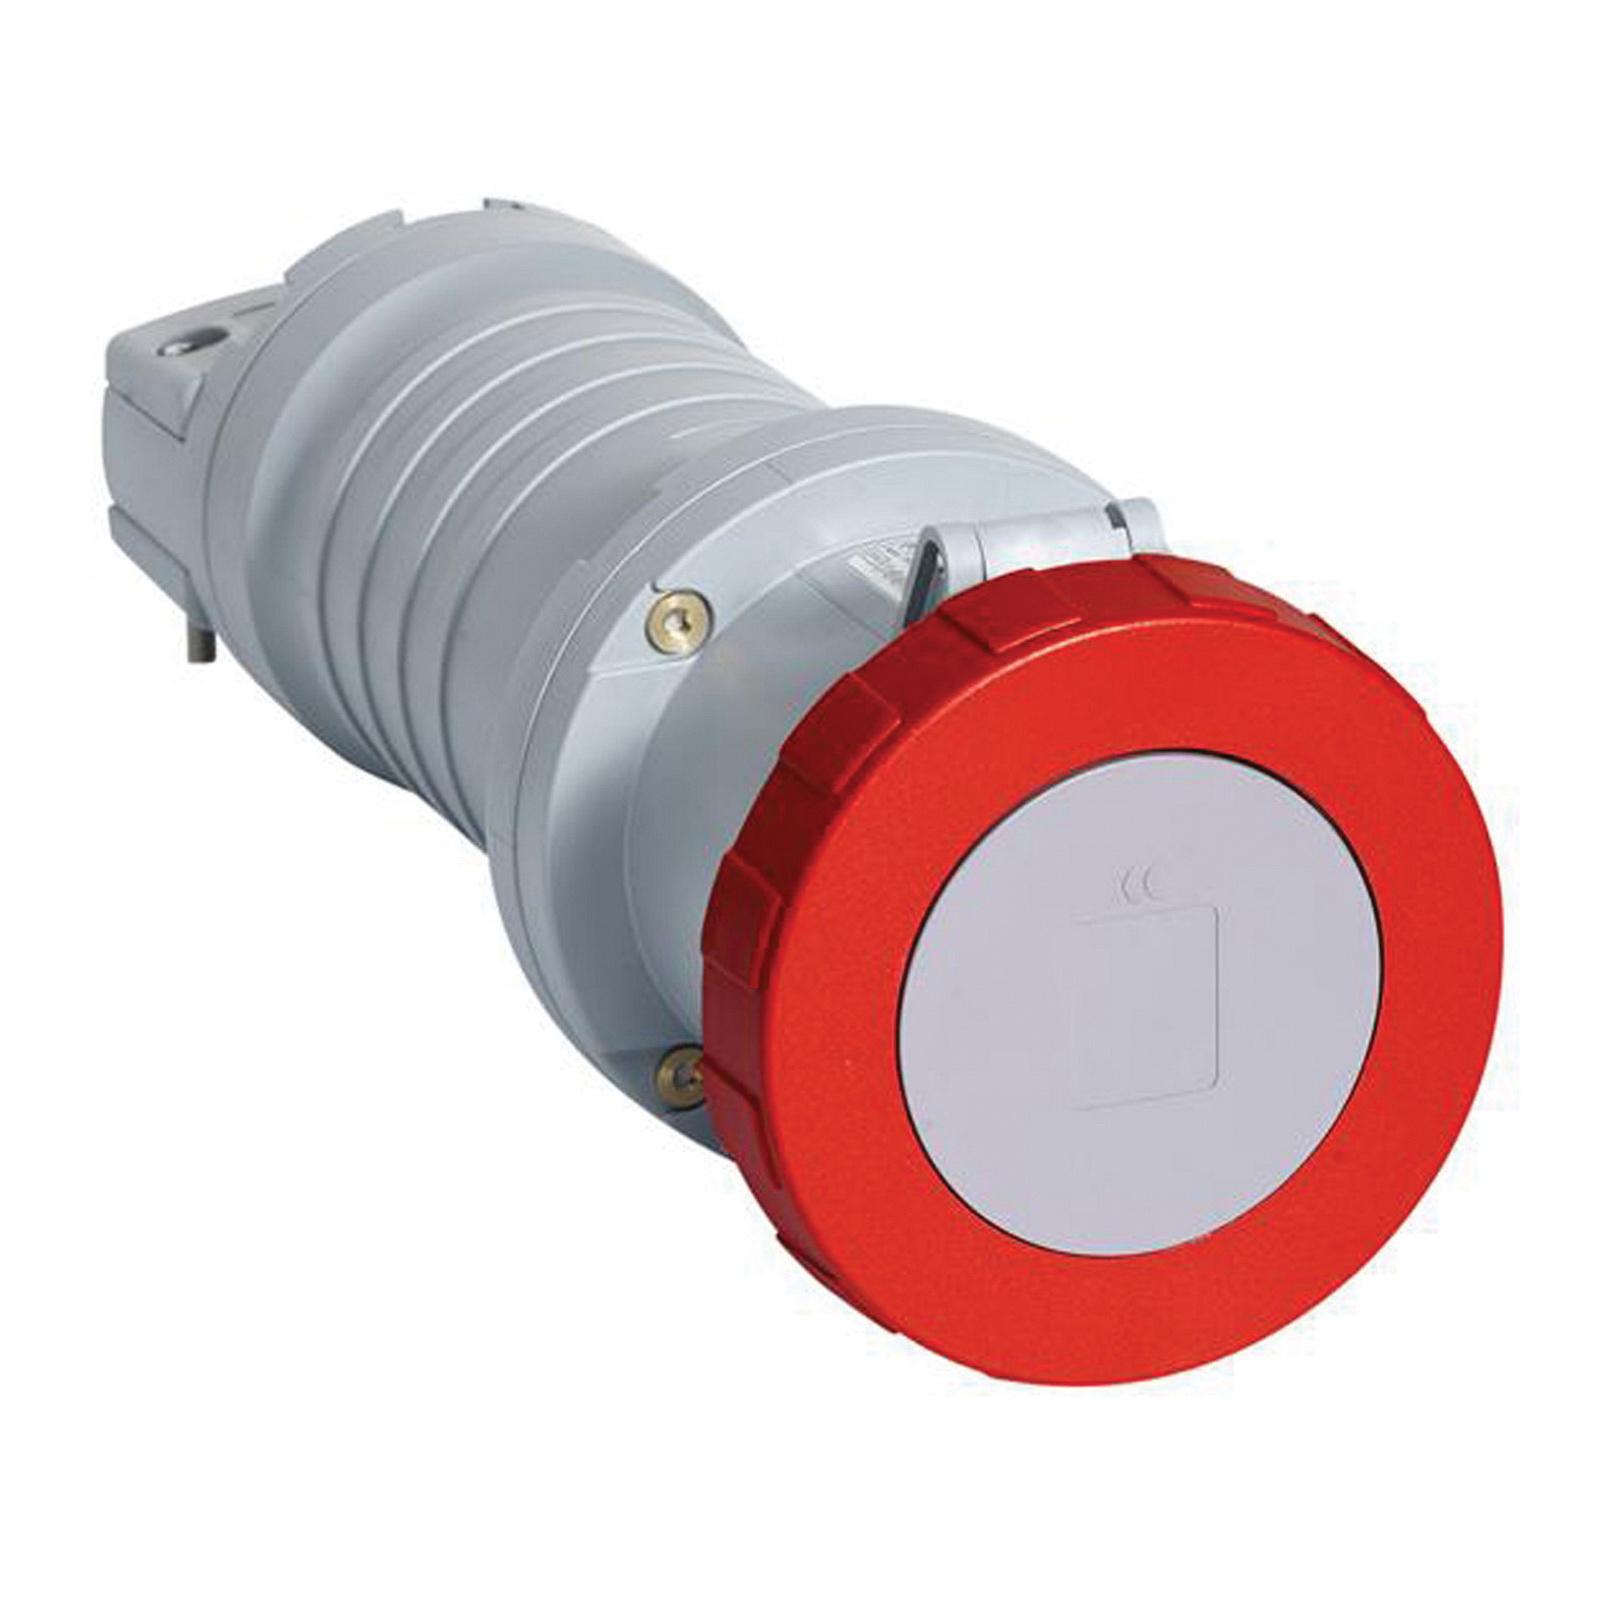 ABB ABB560C7W Pin and Sleeve Connector